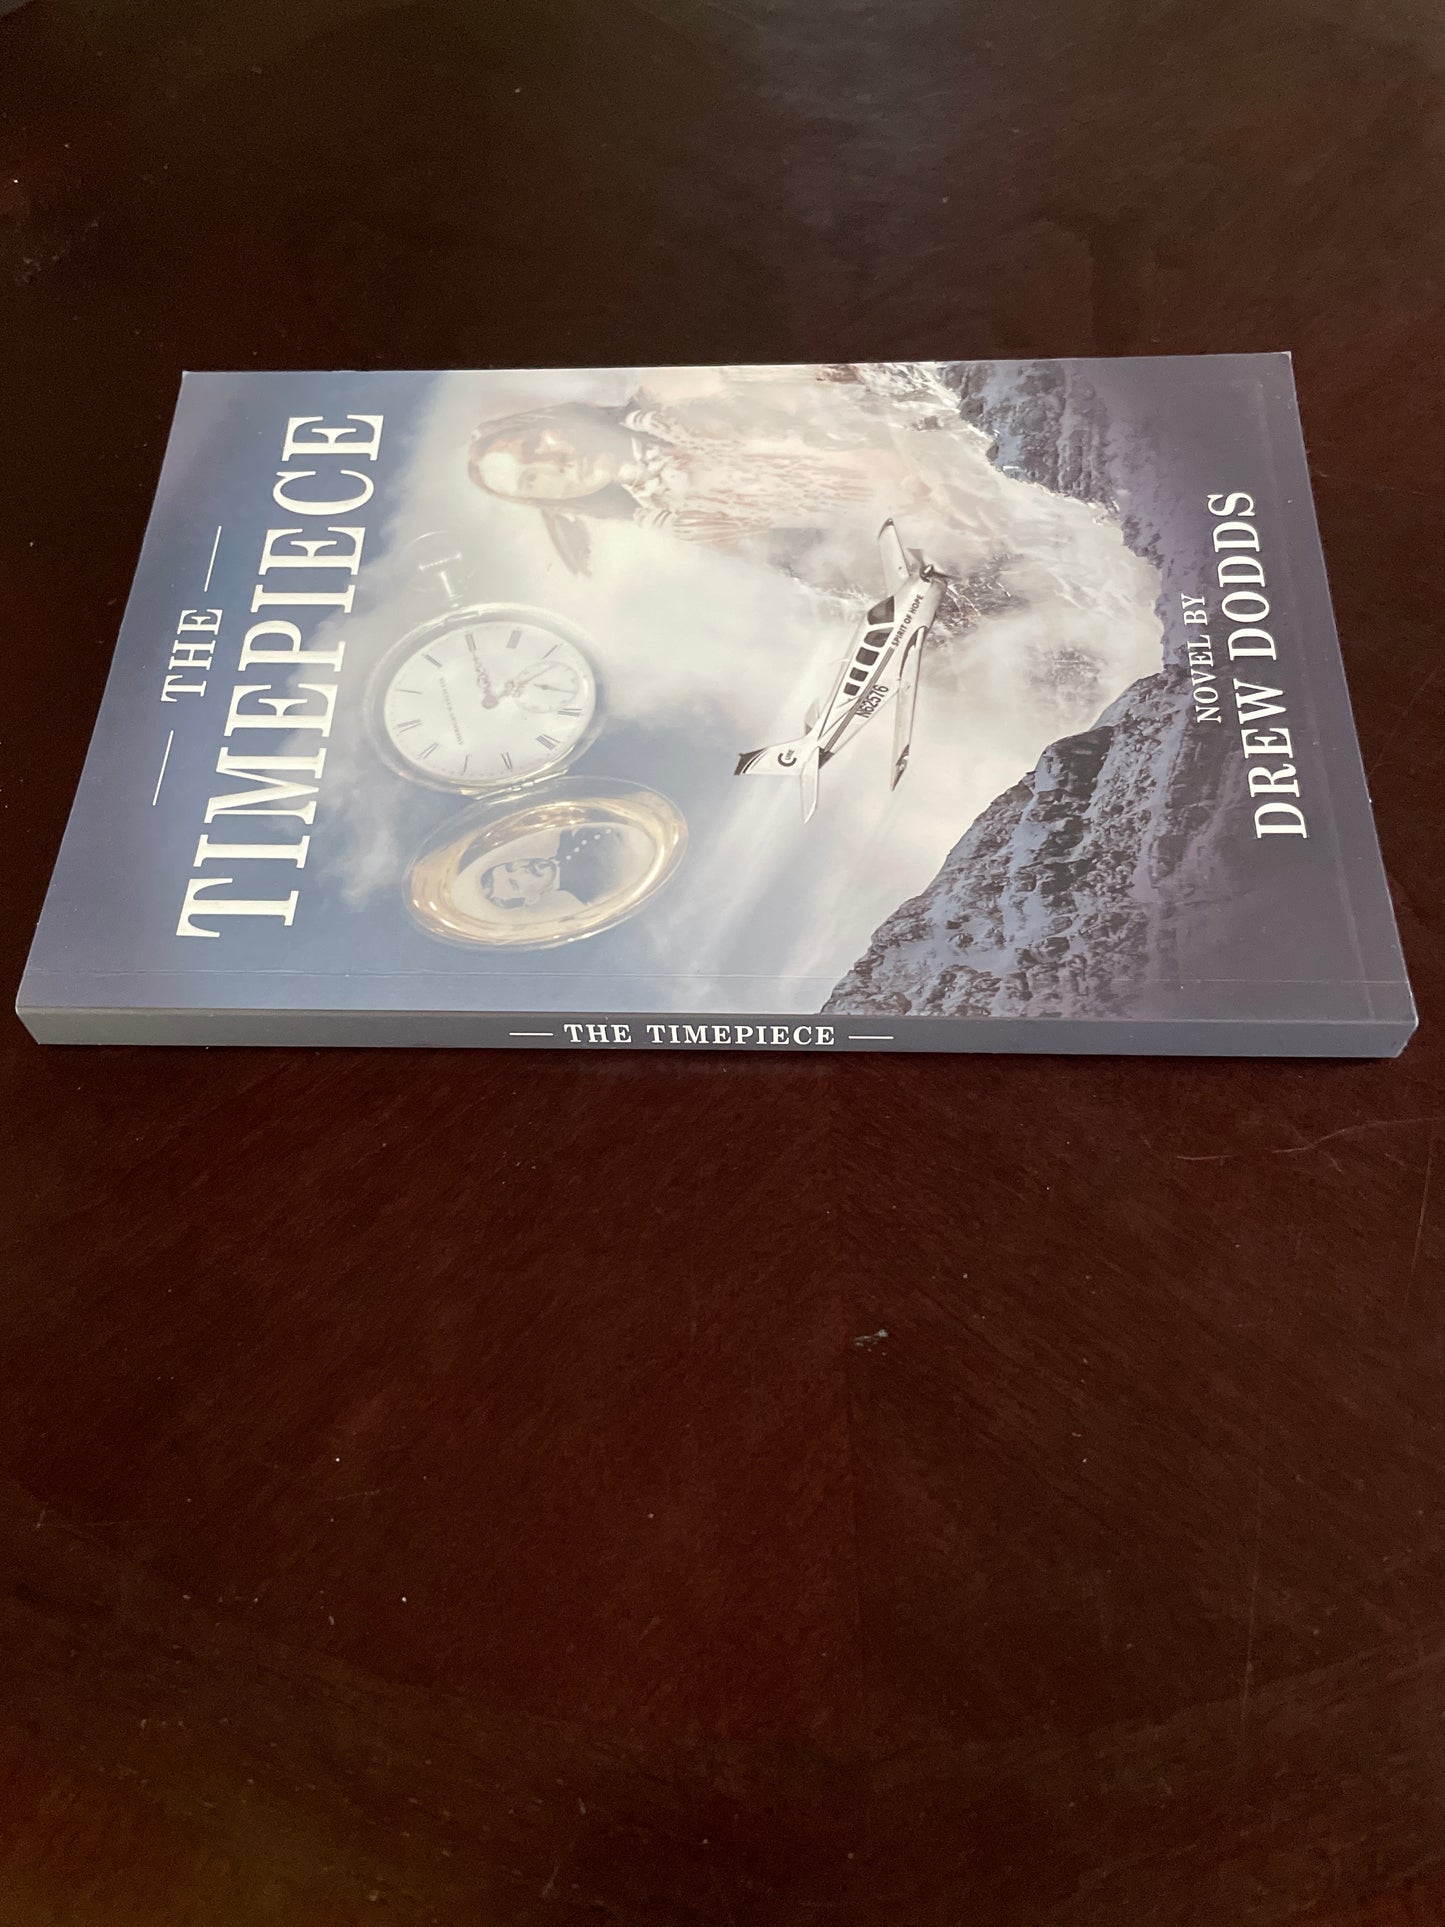 The Timepiece (Signed) - Dodds, Drew